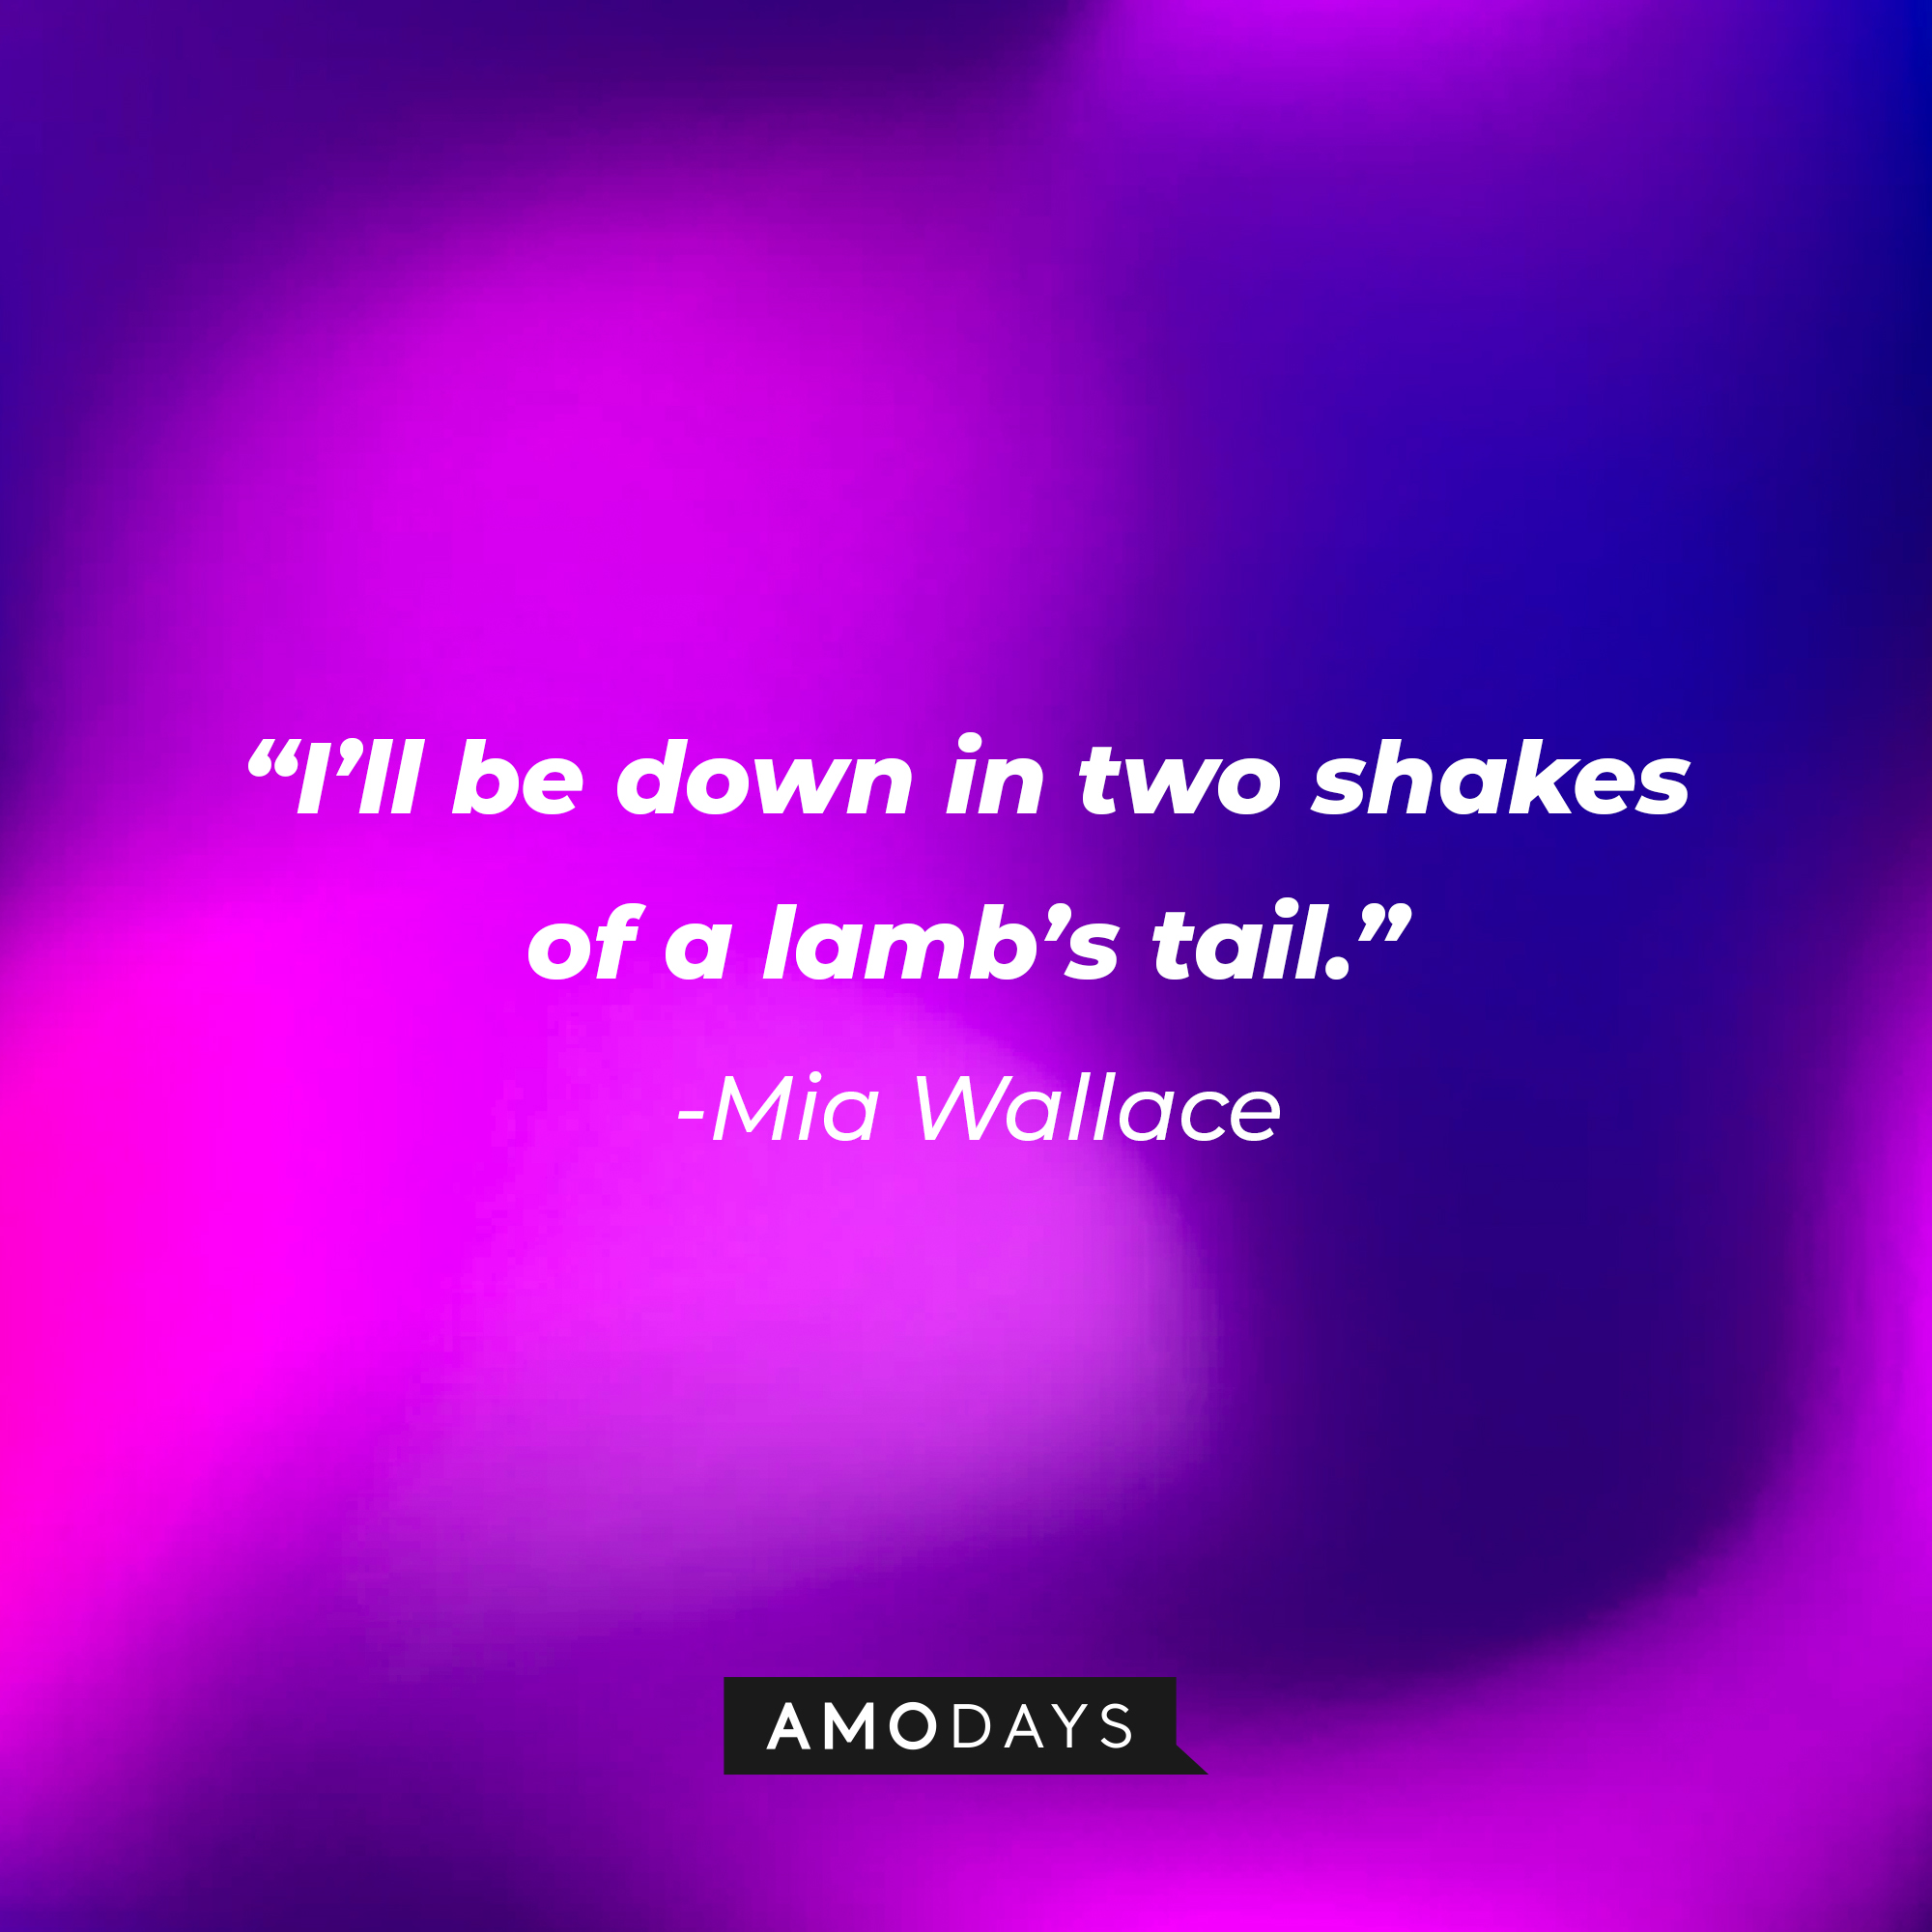 Mia Wallace’s quote: “I’ll be down in two shakes of a lamb’s tail.” | Source: AmoDays